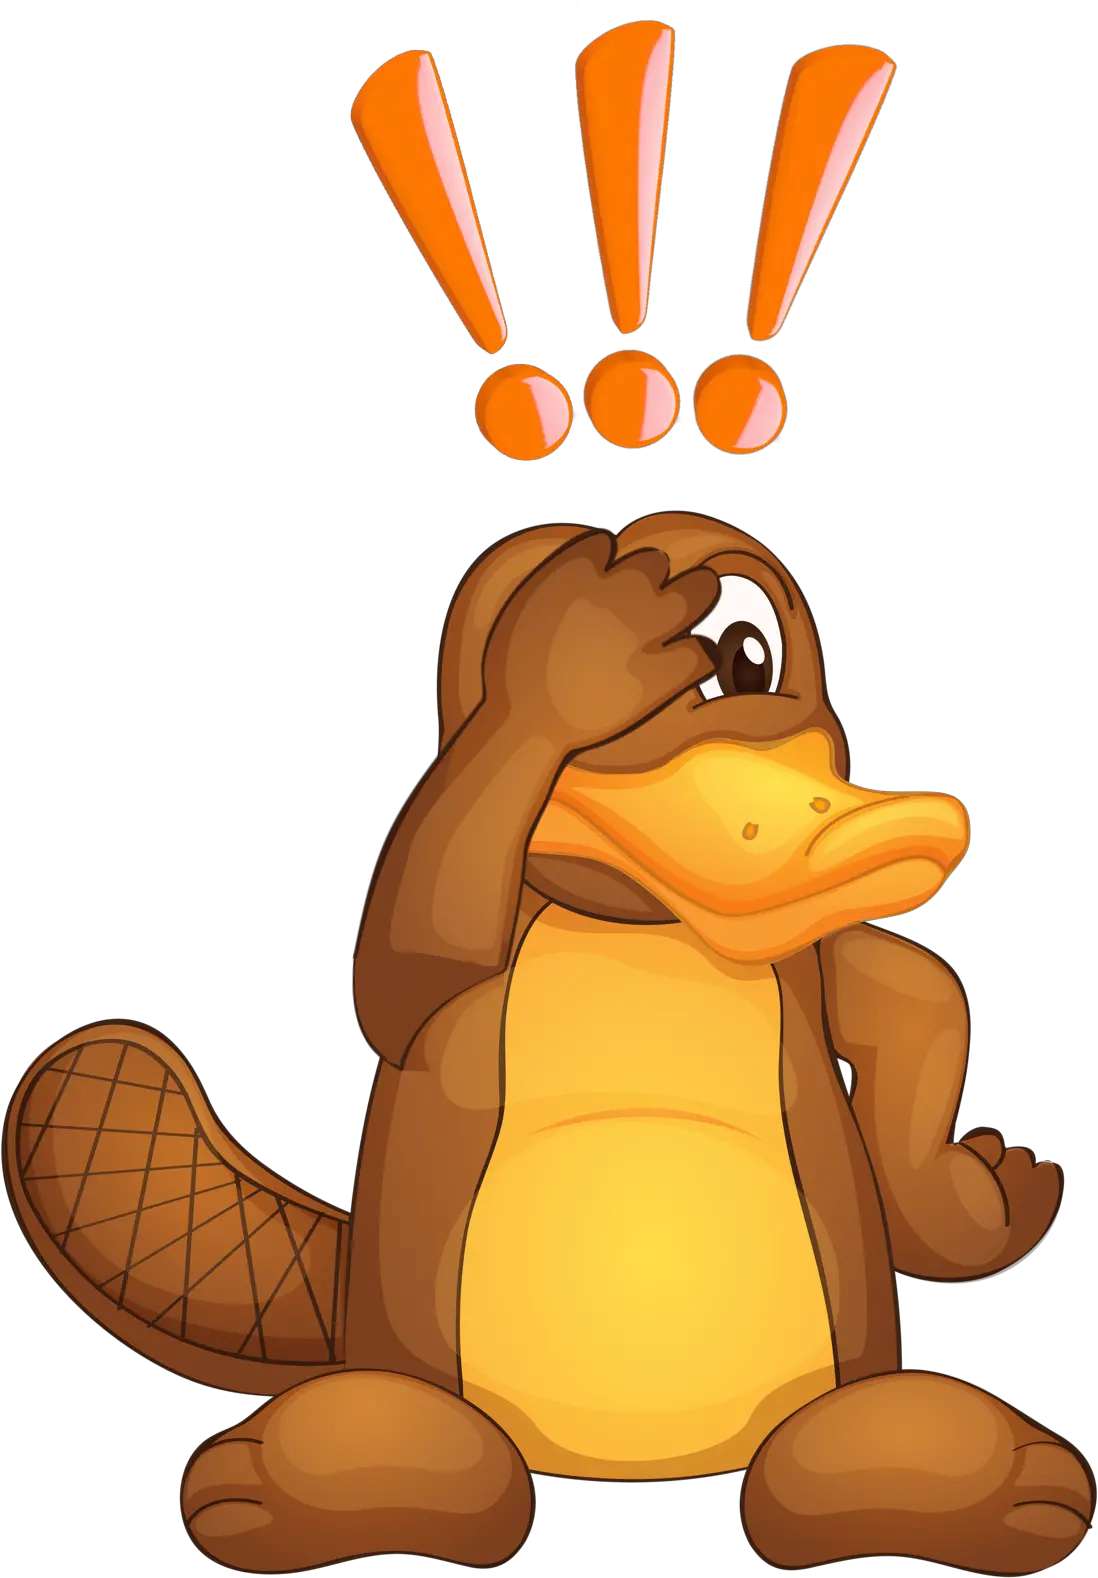 Platypus Exclamation Warrawong Wildlife Sanctuary Perry The Platypus Kiss Tail Png Platypus Png